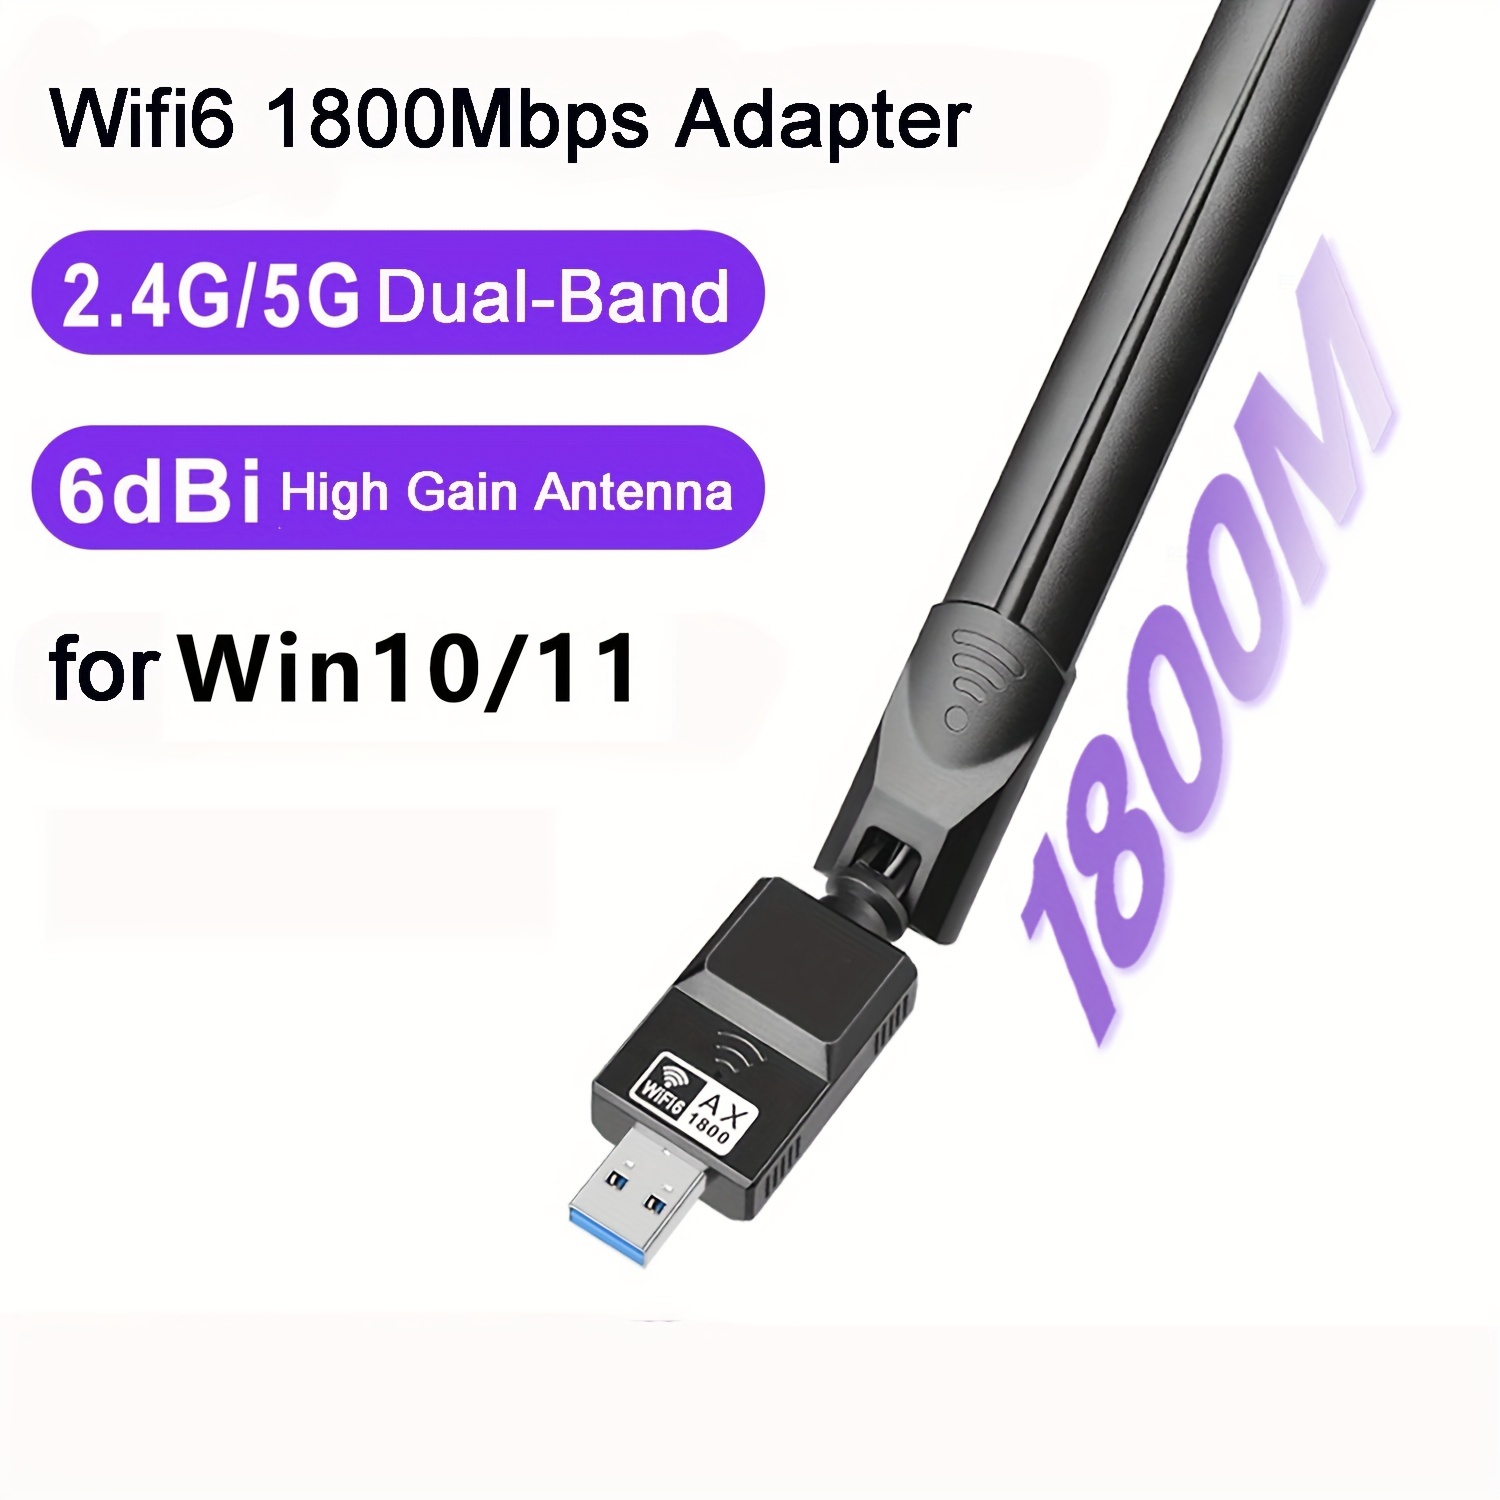 WiFi 6 (802.11ax) 2 x 2 dual-band 2.4 GHz and 5 GHz USB adapter